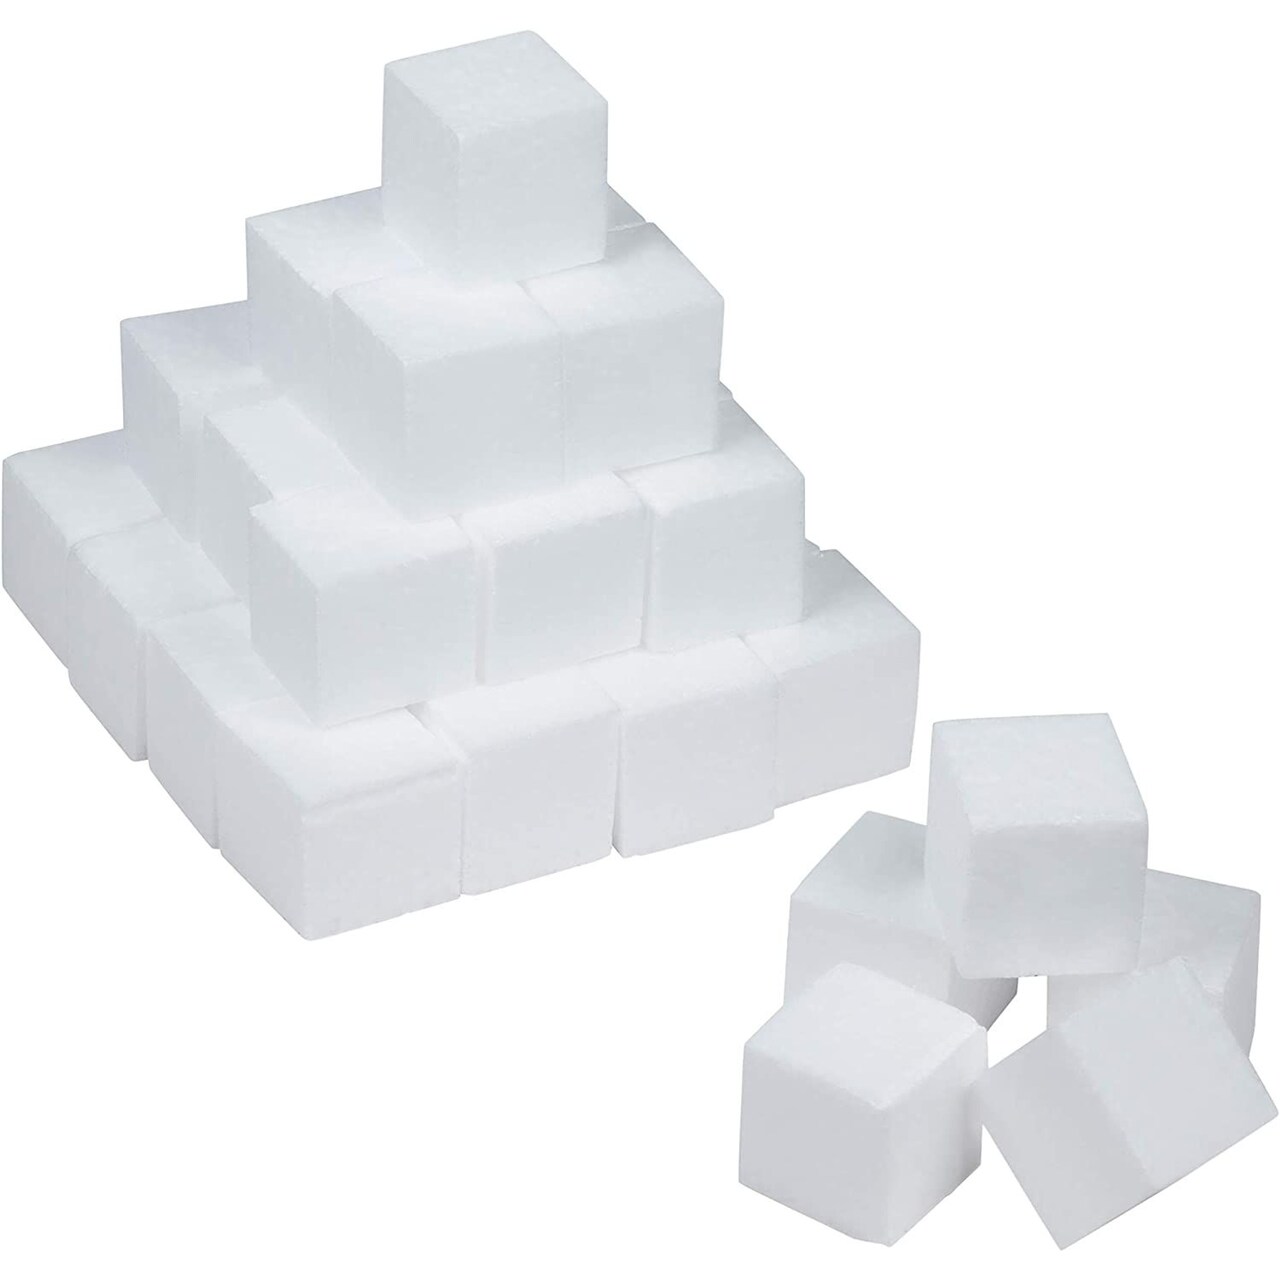 36 Pack Blank Foam Cubes and Square Blocks for Crafts, School